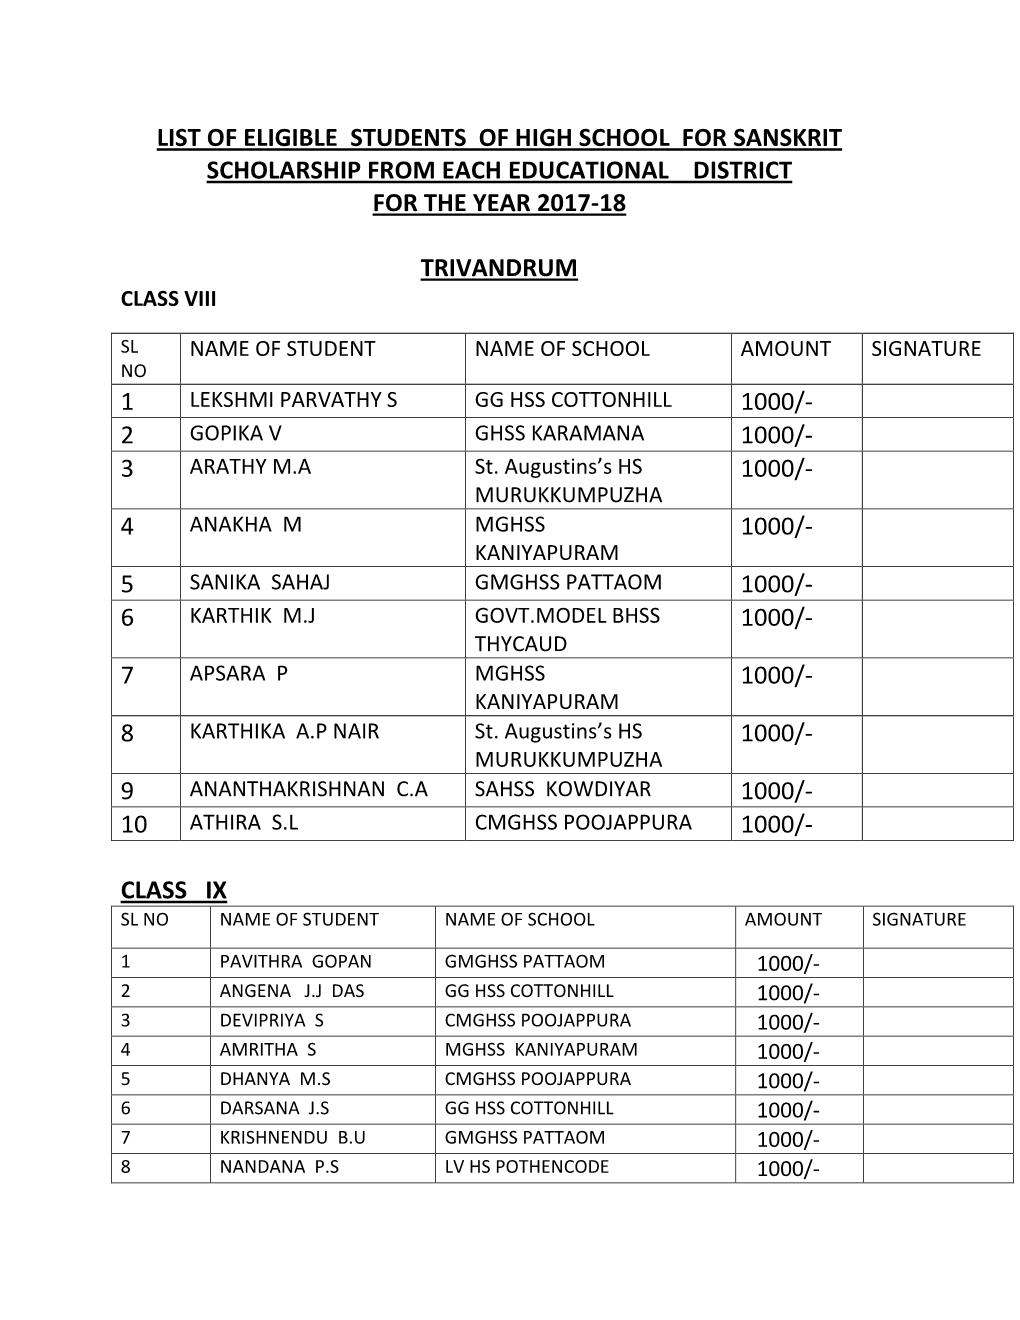 List of Eligible Students of High School for Sanskrit Scholarship from Each Educational District for the Year 2017-18